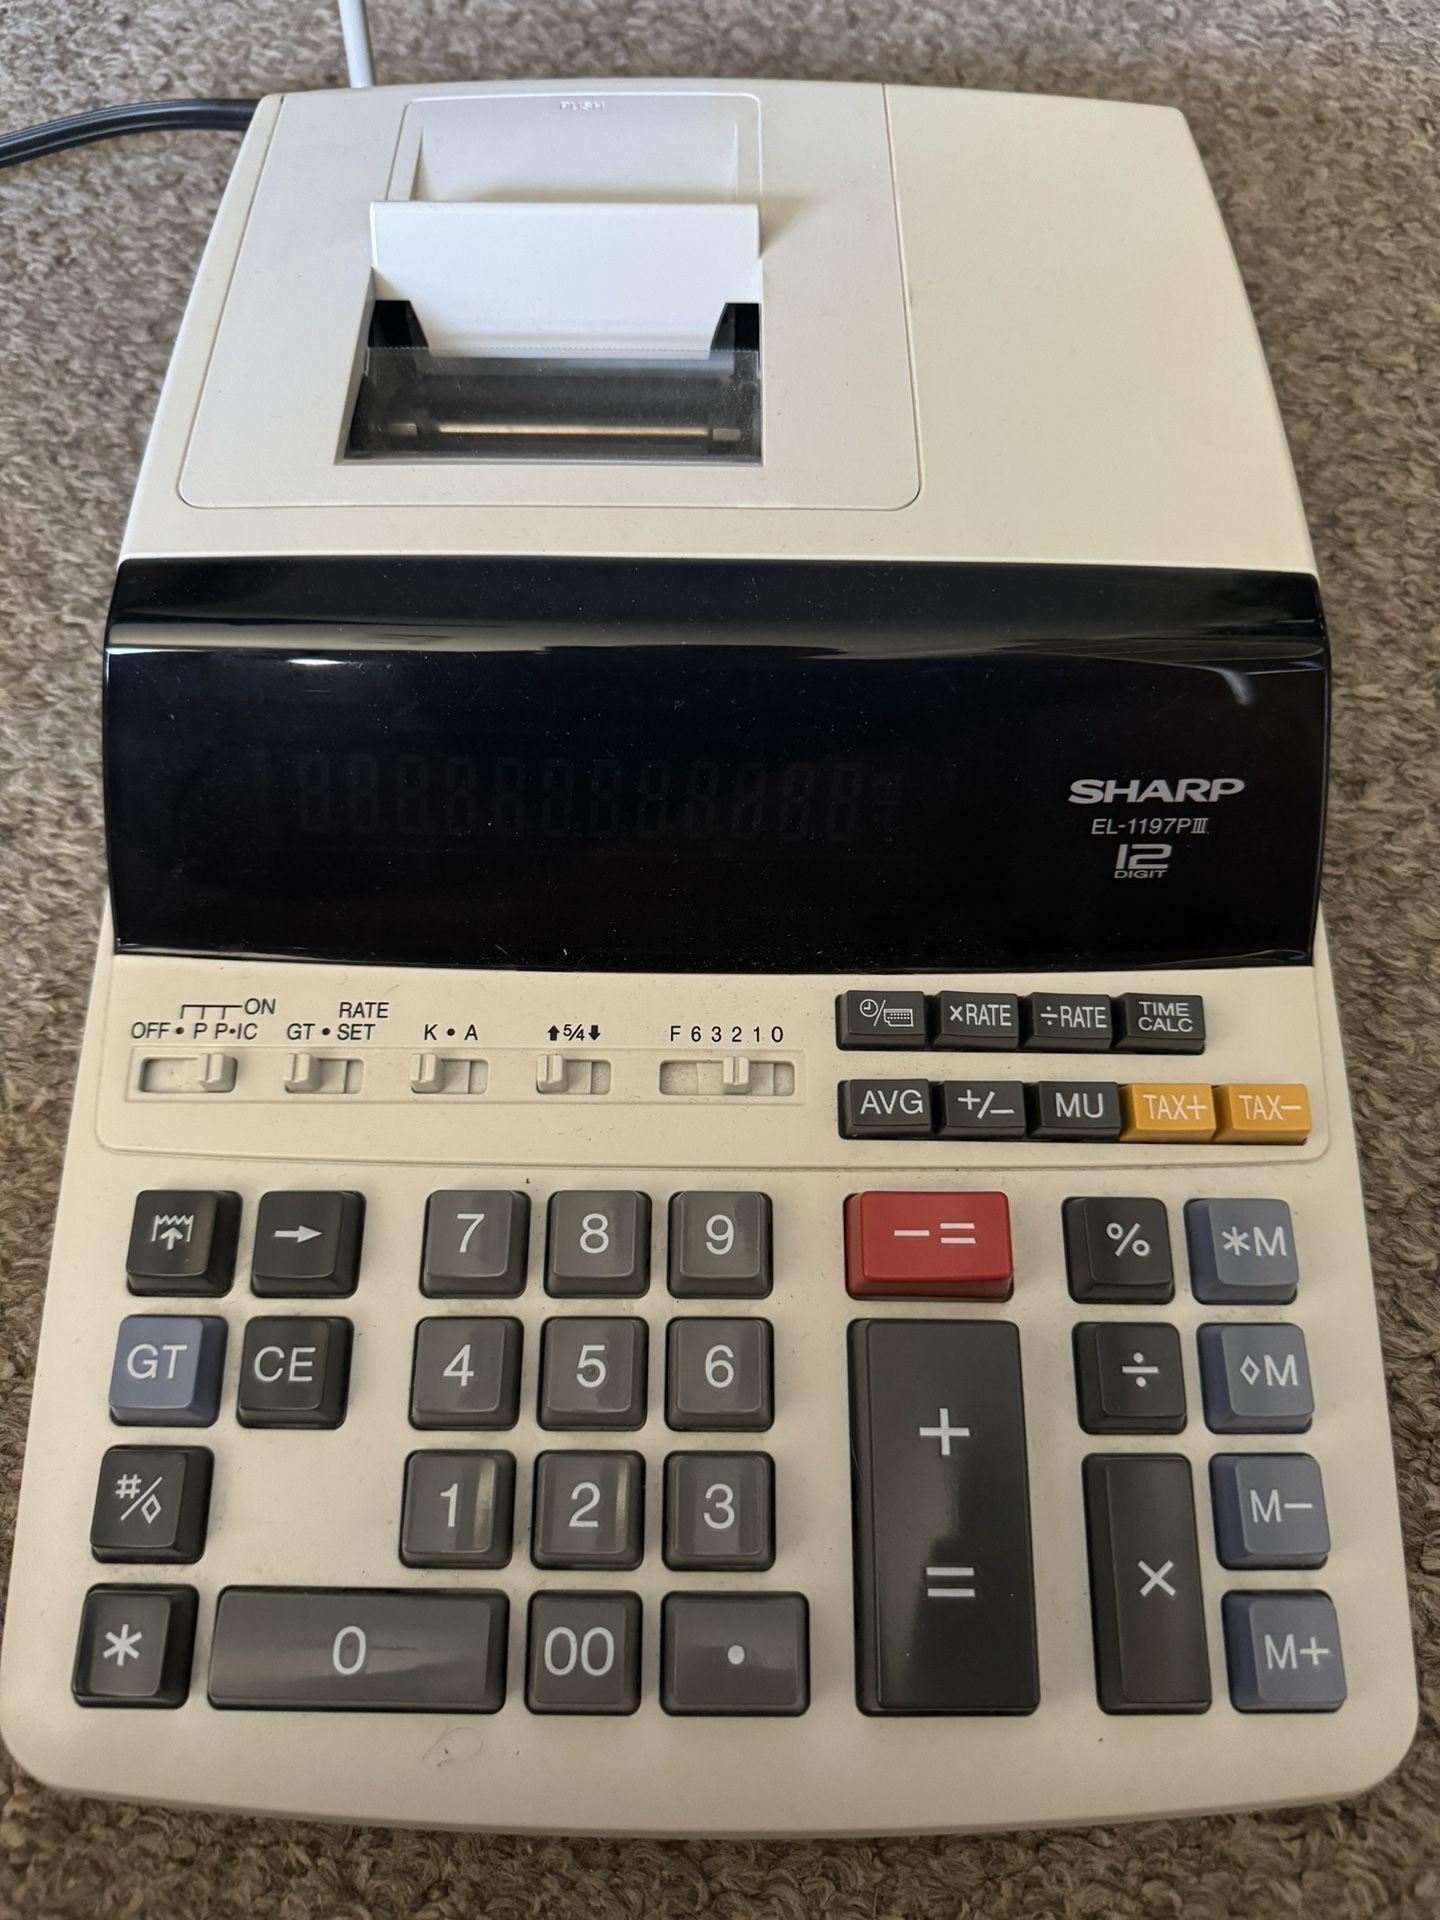 12 Digit Commercial Printing Calculator 